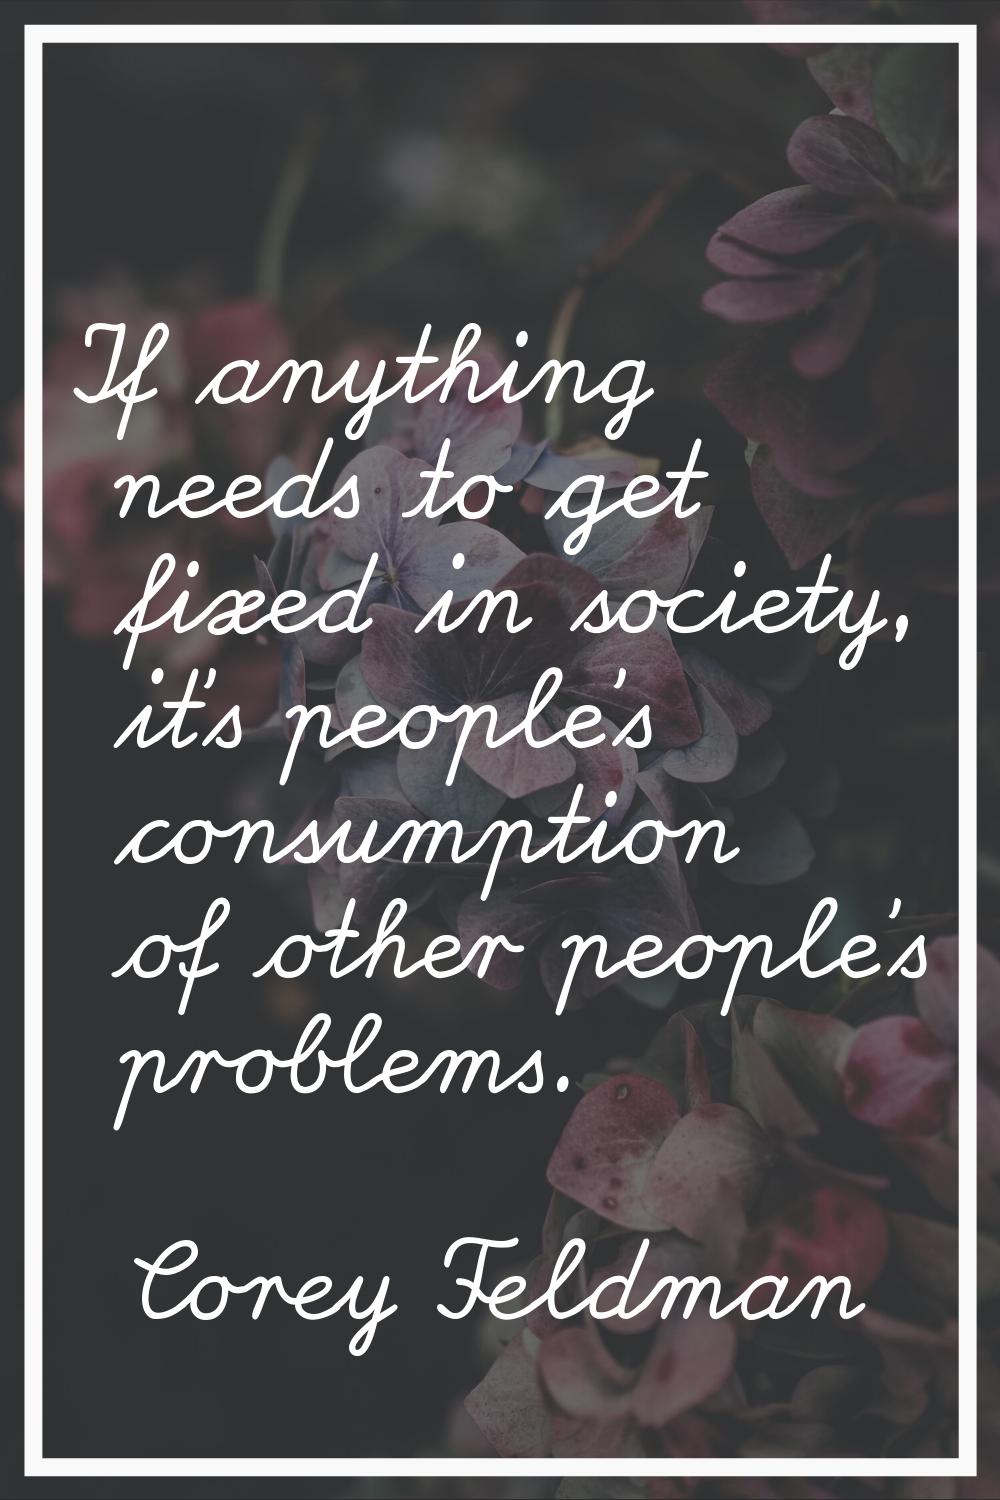 If anything needs to get fixed in society, it's people's consumption of other people's problems.